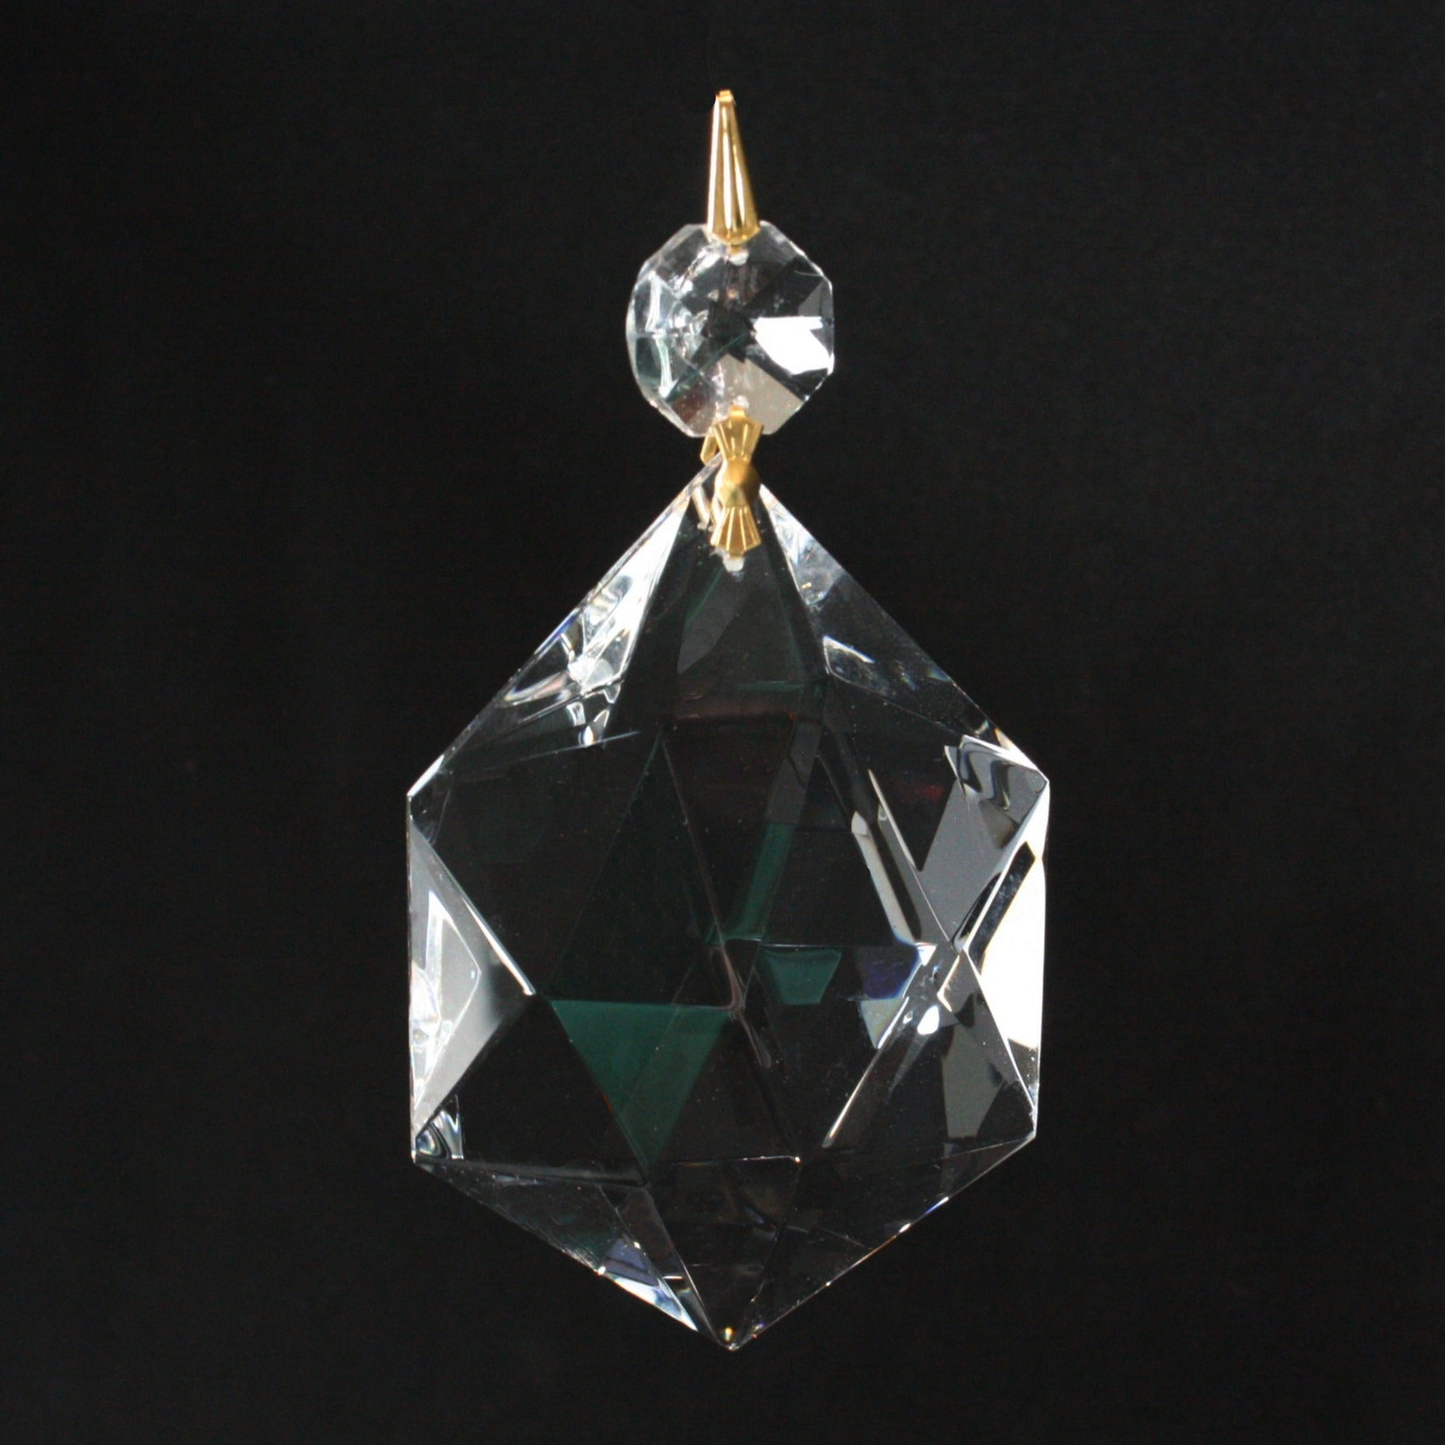 Turkish Crystal 6-Sided Prism w/ Top Bead